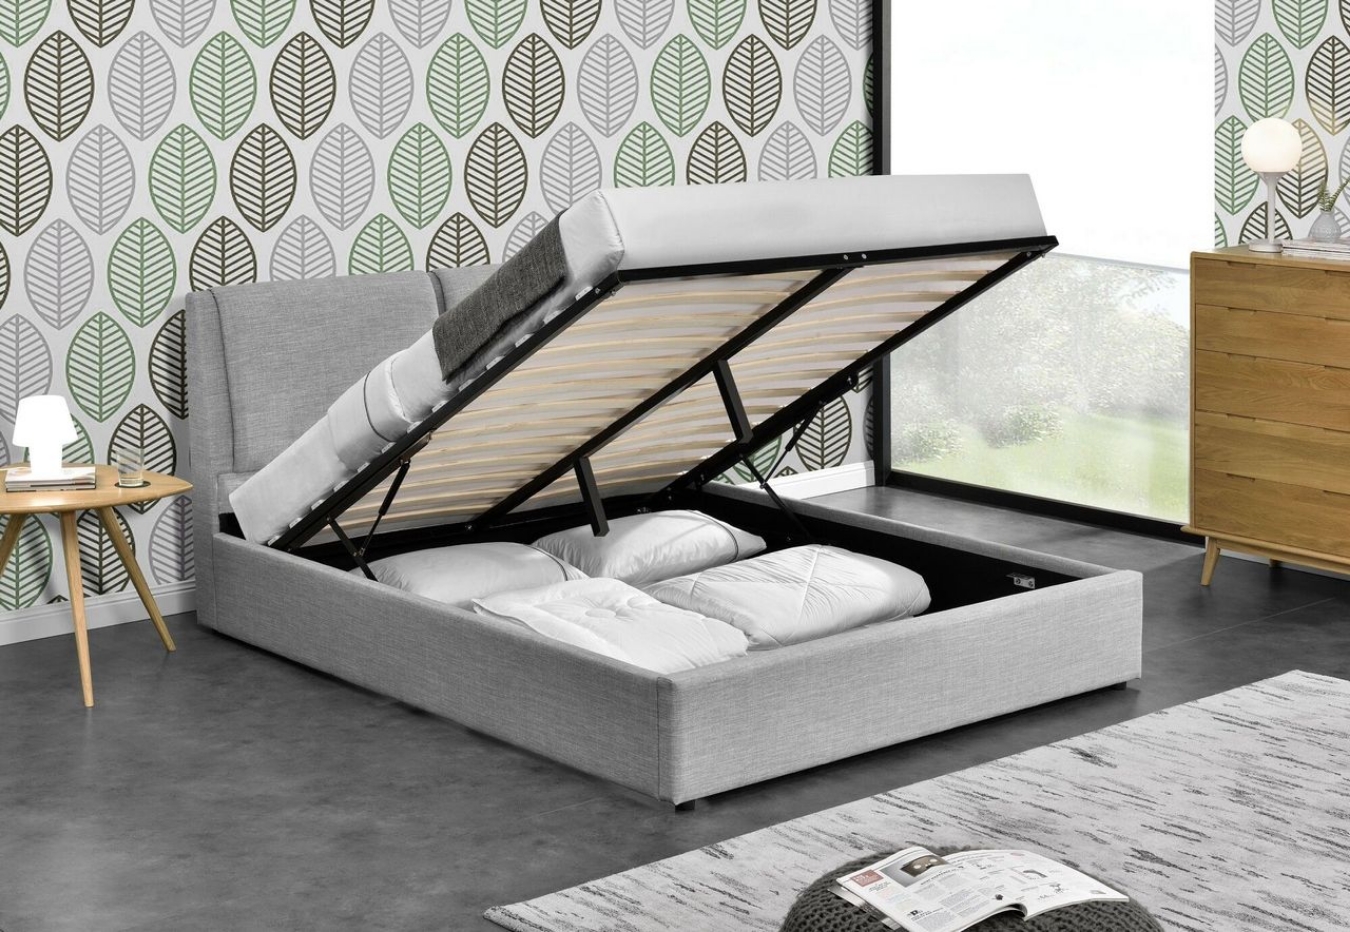 The Rebecca Light Grey Fabric Gas Lift Storage Collection bed frame features Australian inspired furniture engineering.